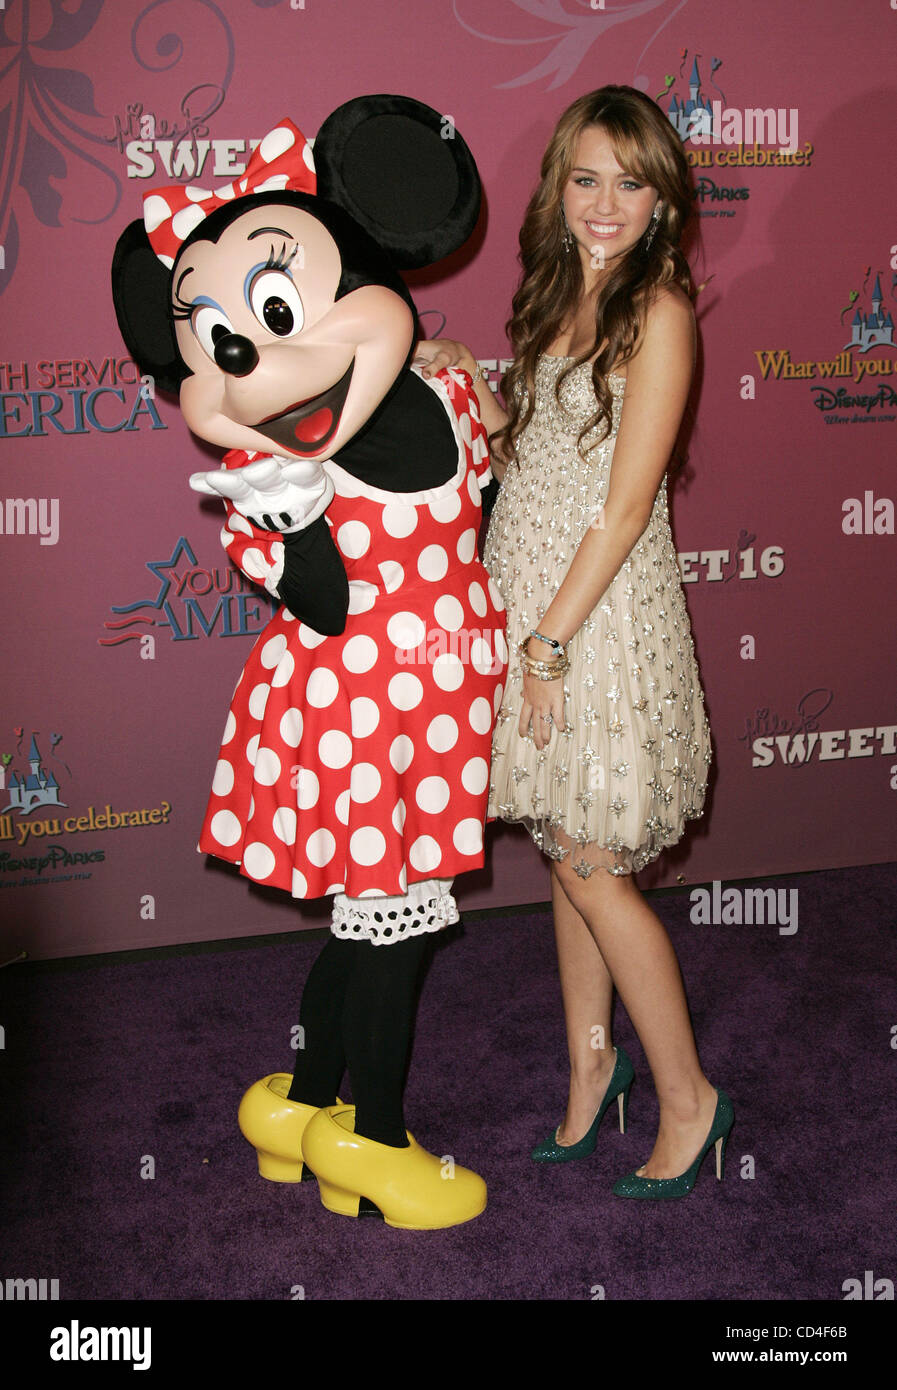 Oct 05, 2008 - Anaheim, California, USA - Actress/singer songwriter MILEY CYRUS and MINNIE MOUSE at the Miley Cyrus Sweet 16 Birthday Party held at Disneyland in Anaheim. (Credit Image: © Lisa O'Connor/ZUMA Press) Stock Photo